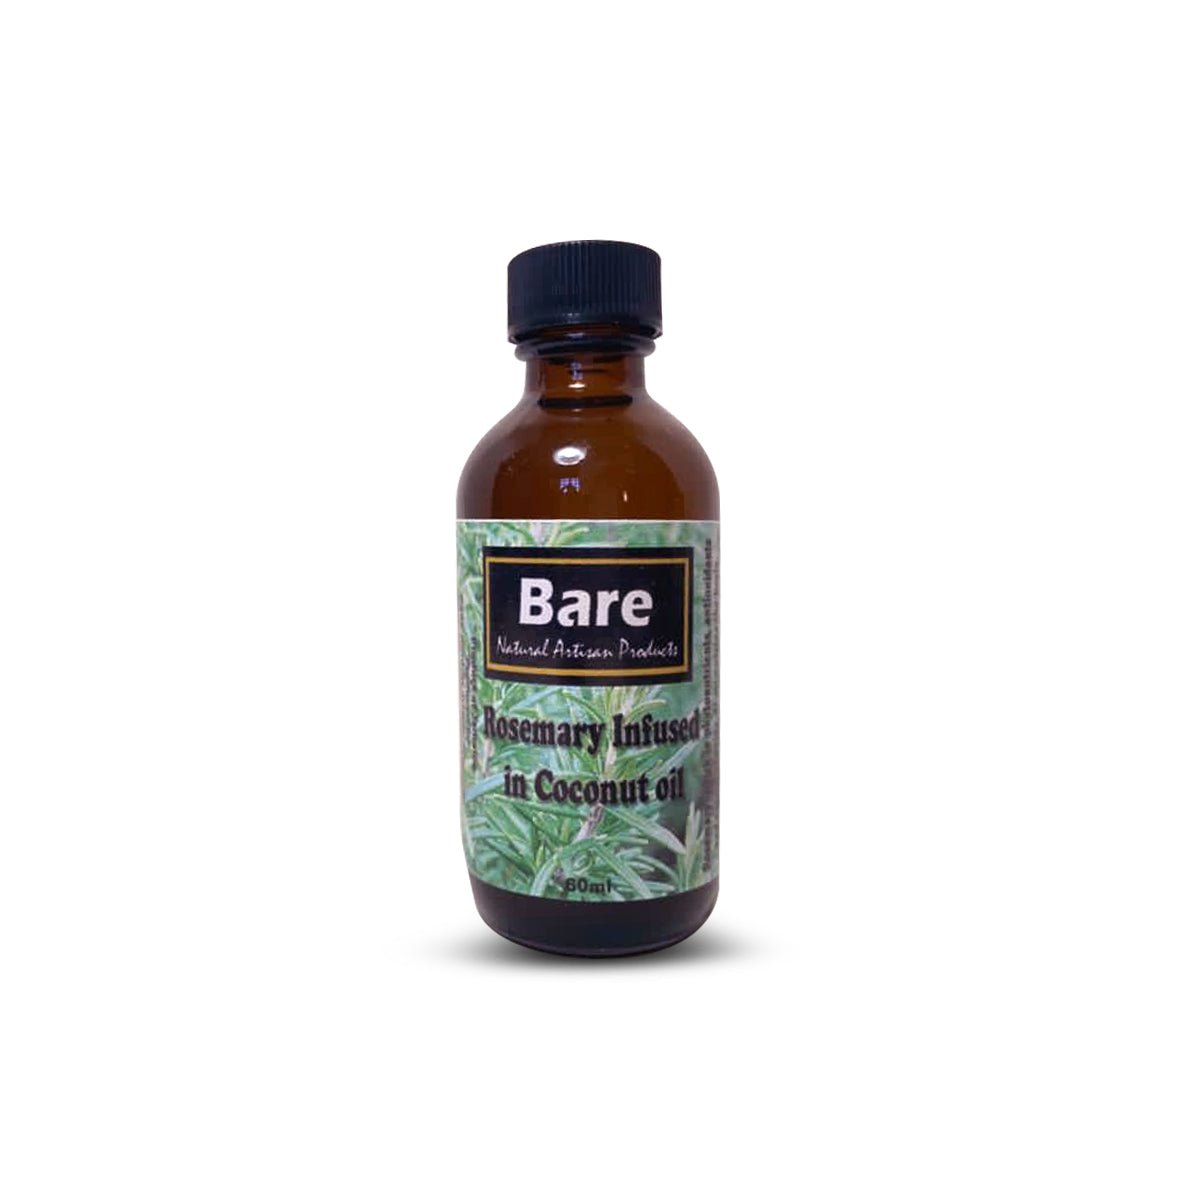 Bare Natural Products Rosemary Infused in Coconut Oil, 60ml